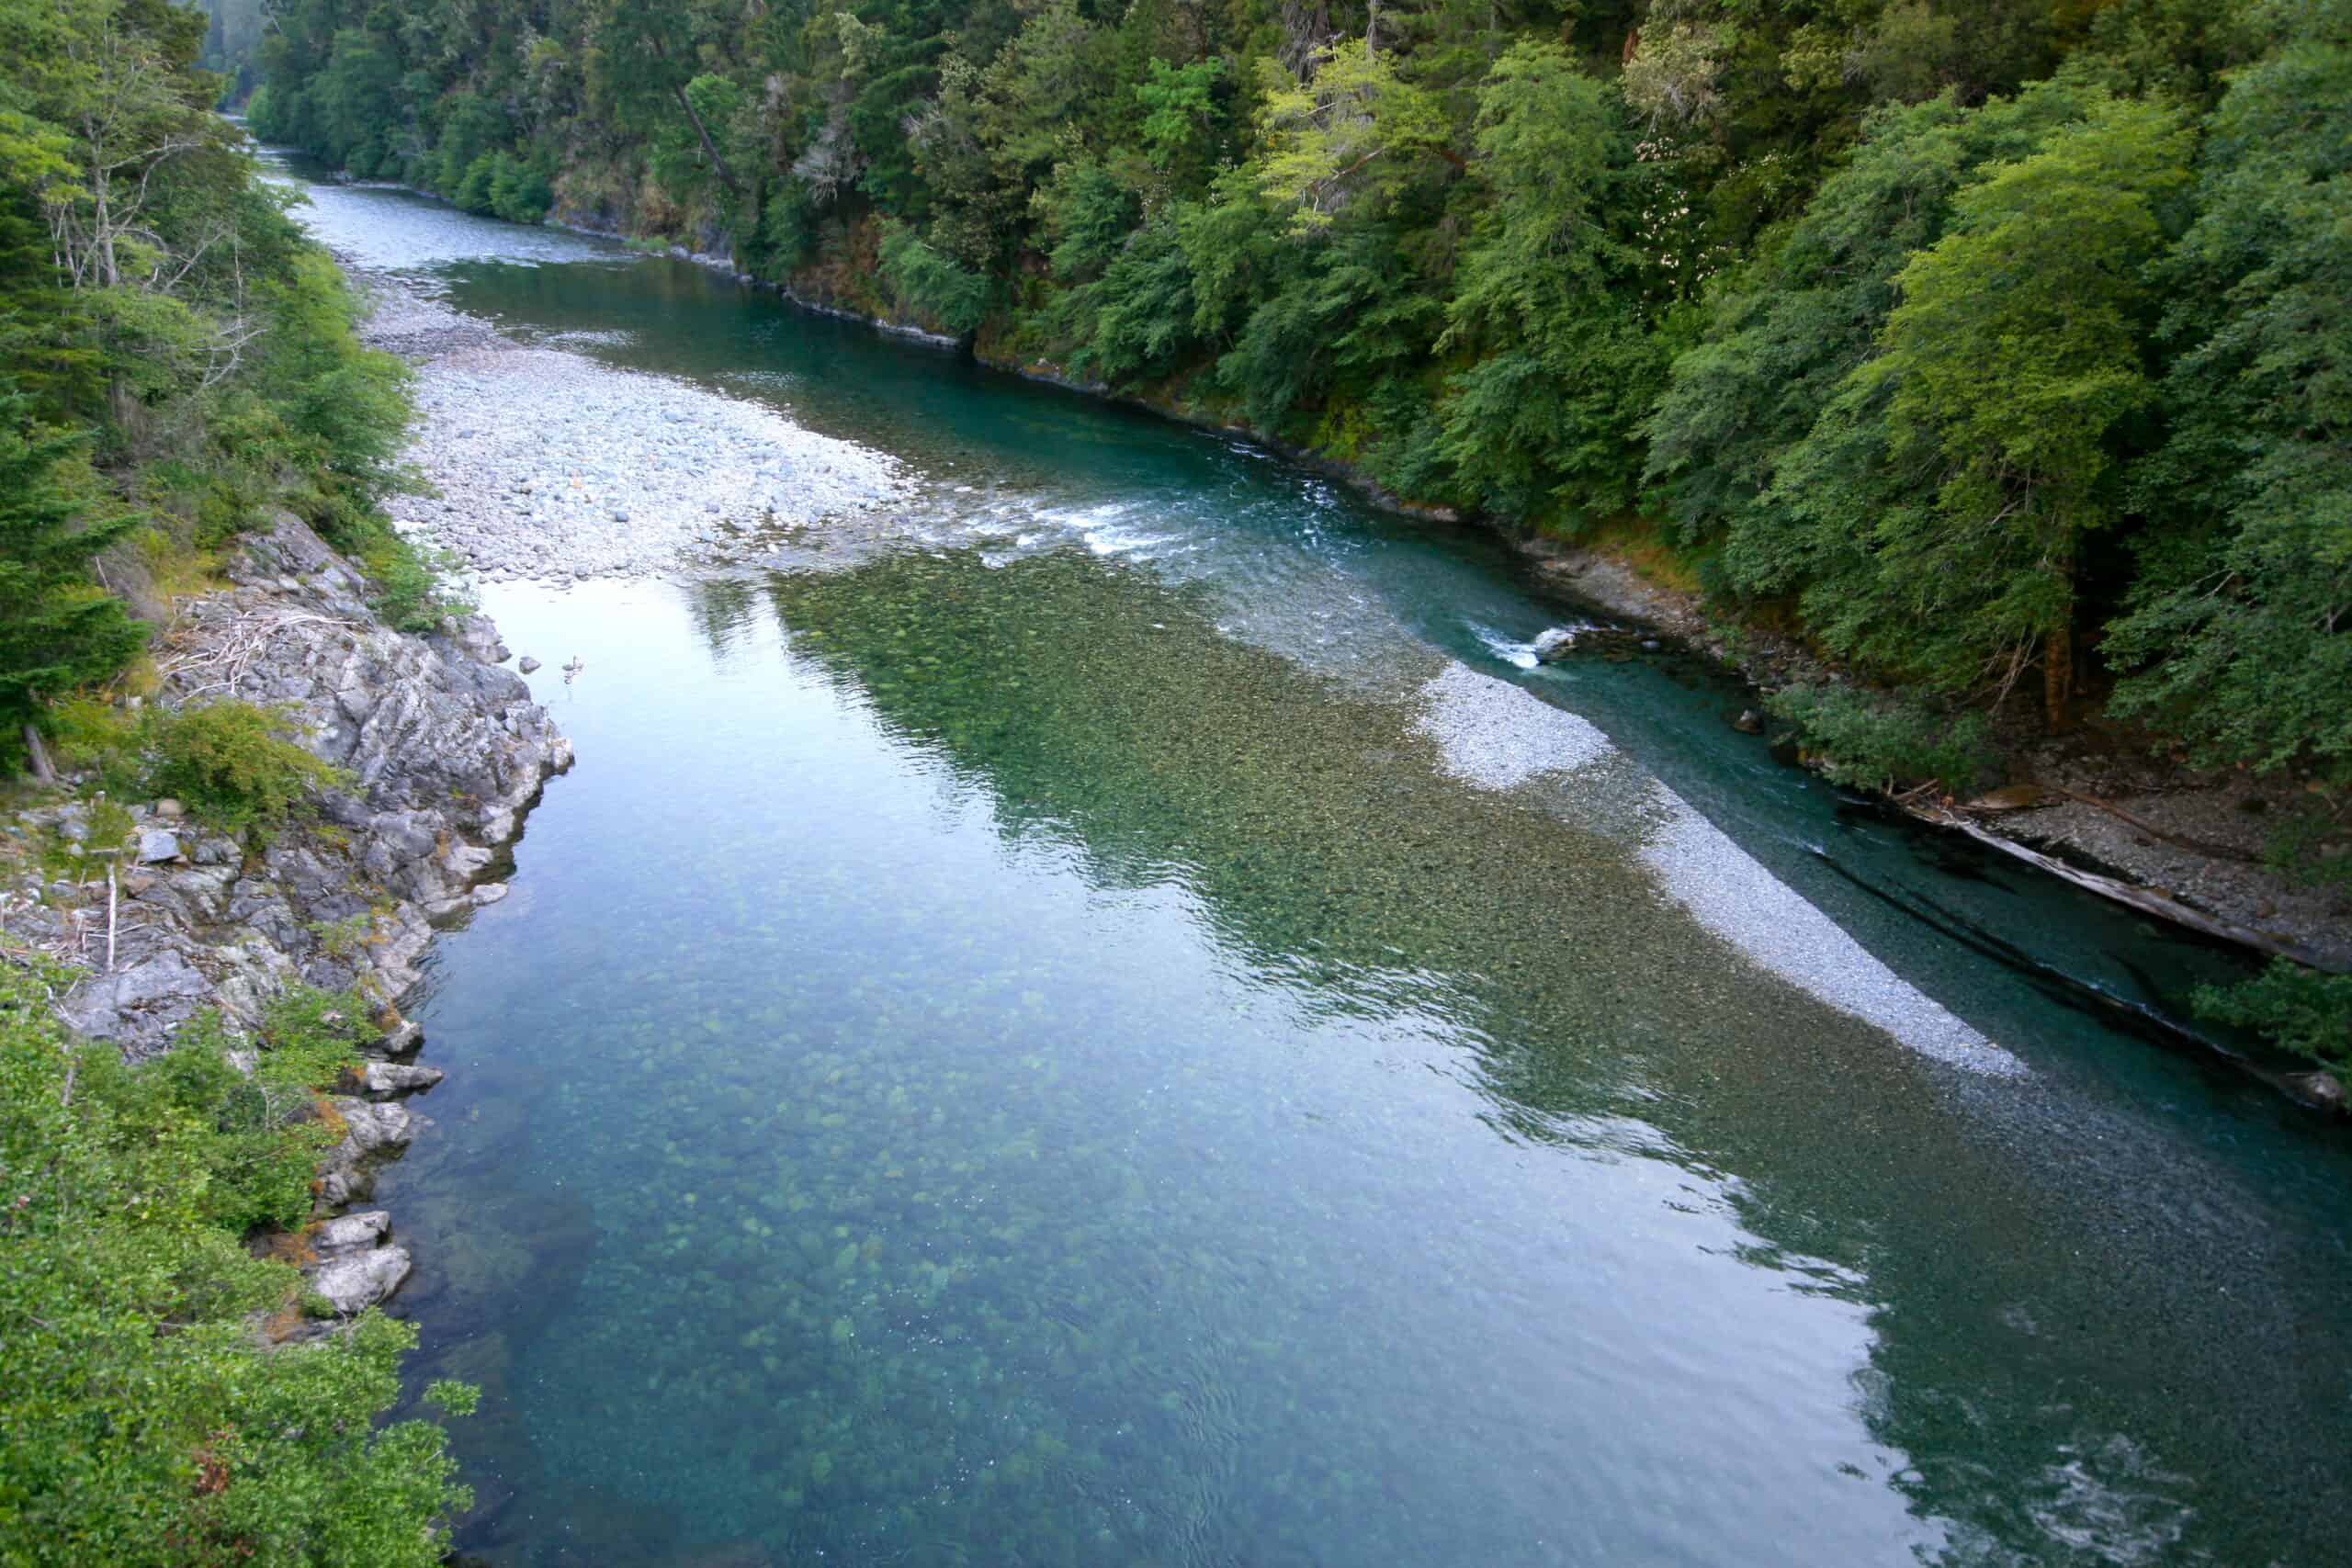 North Fork of the Smith River near Hiouchi, California by PGHolbrook